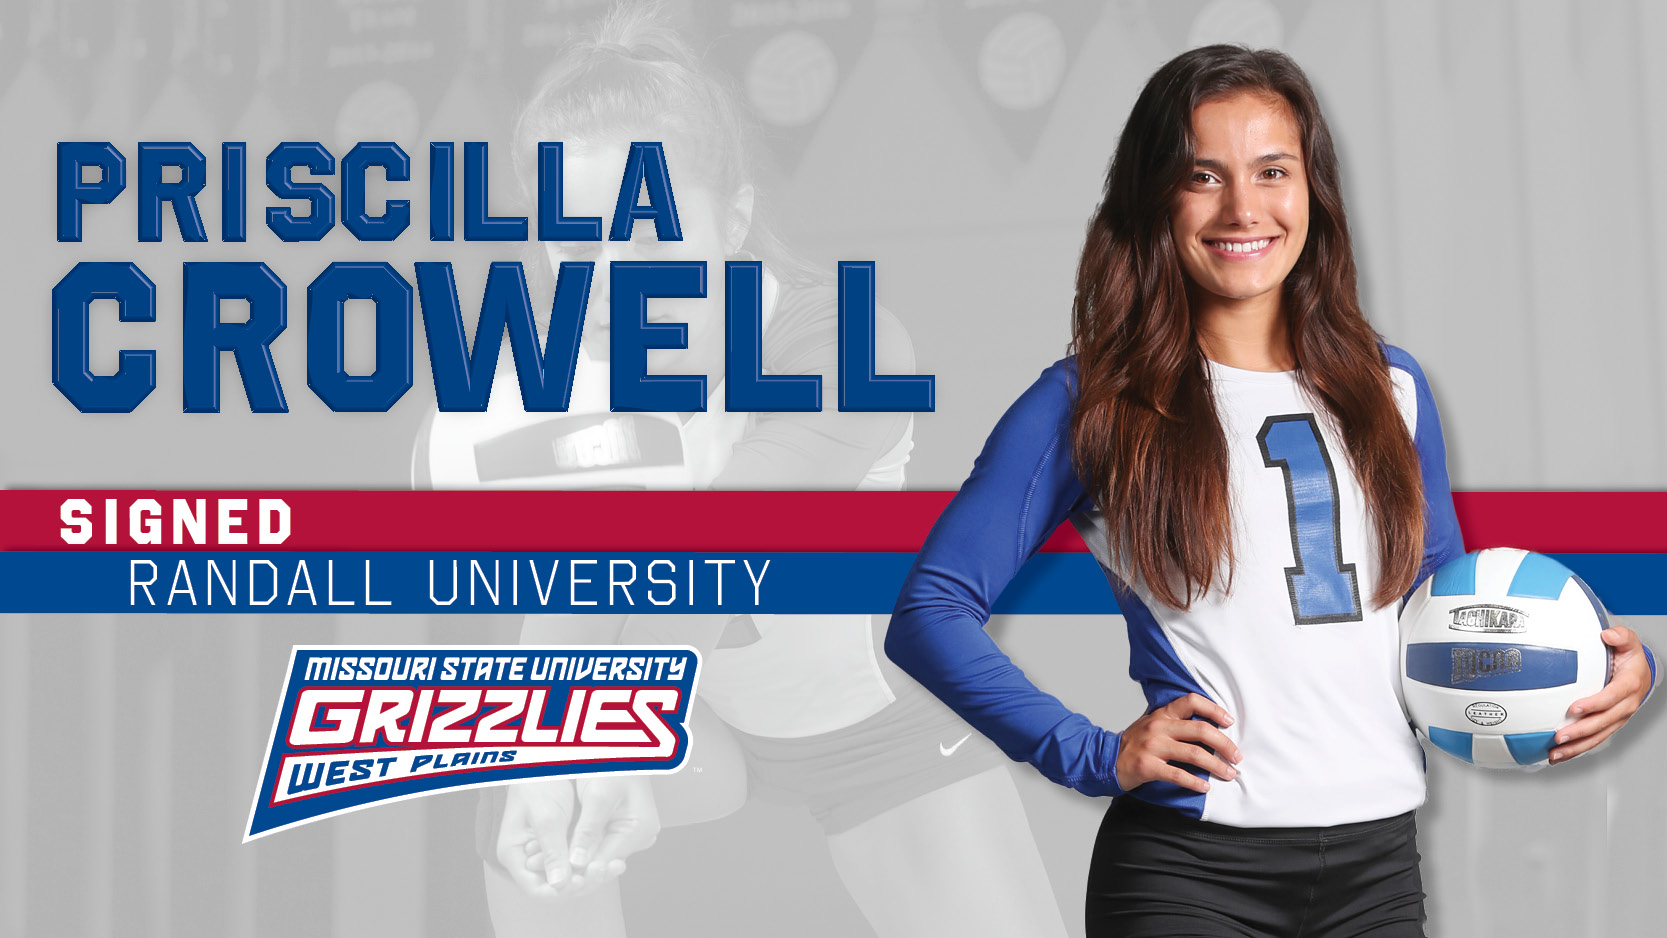 Grizzly Volleyball standout Priscilla Crowell signs with Randall University